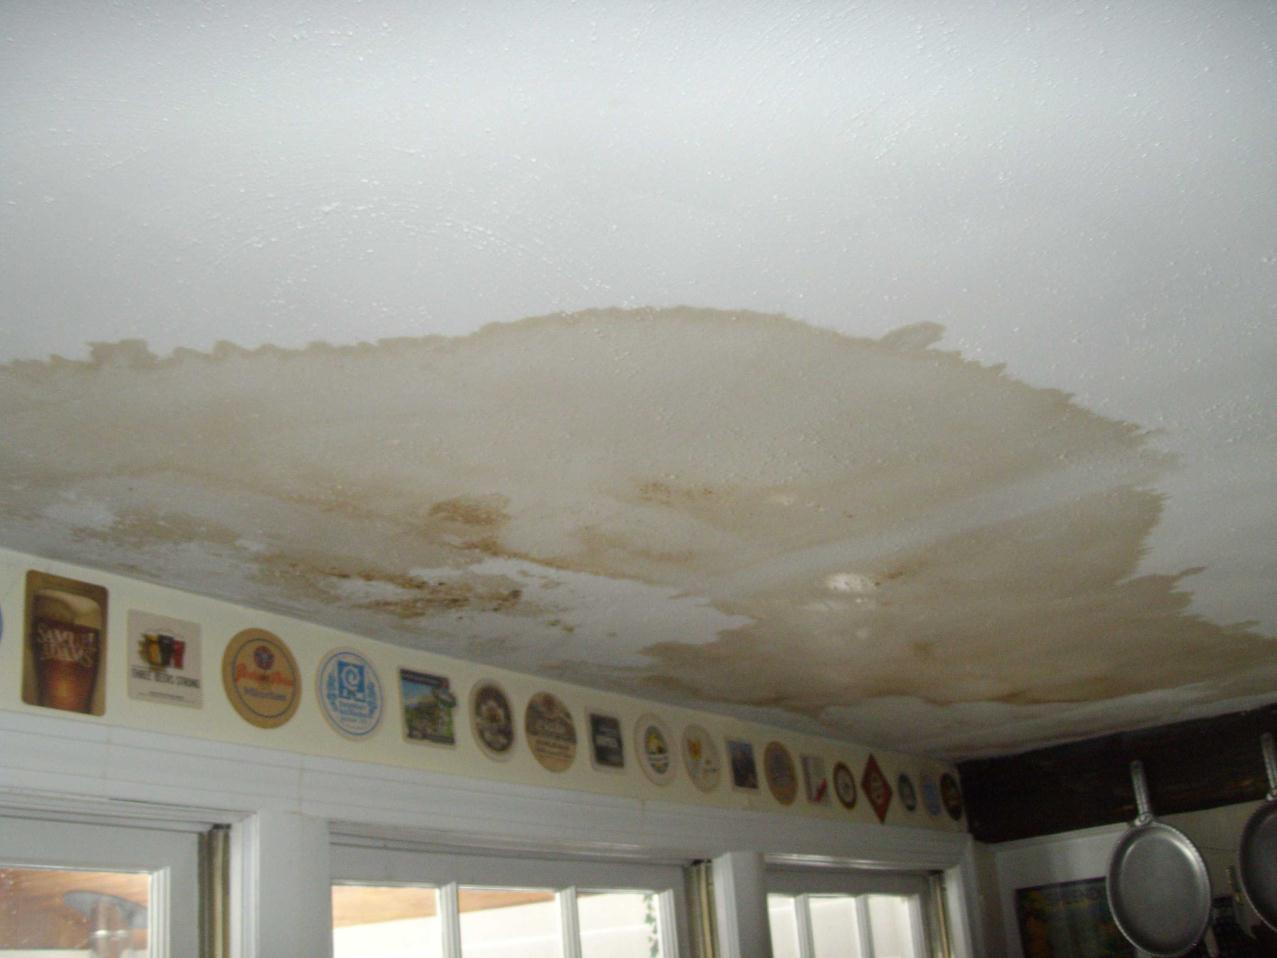 ceiling damage water repair stains ceilings wet paint mold painting bathroom damaged roof walls stain dam ice leak flora brothers